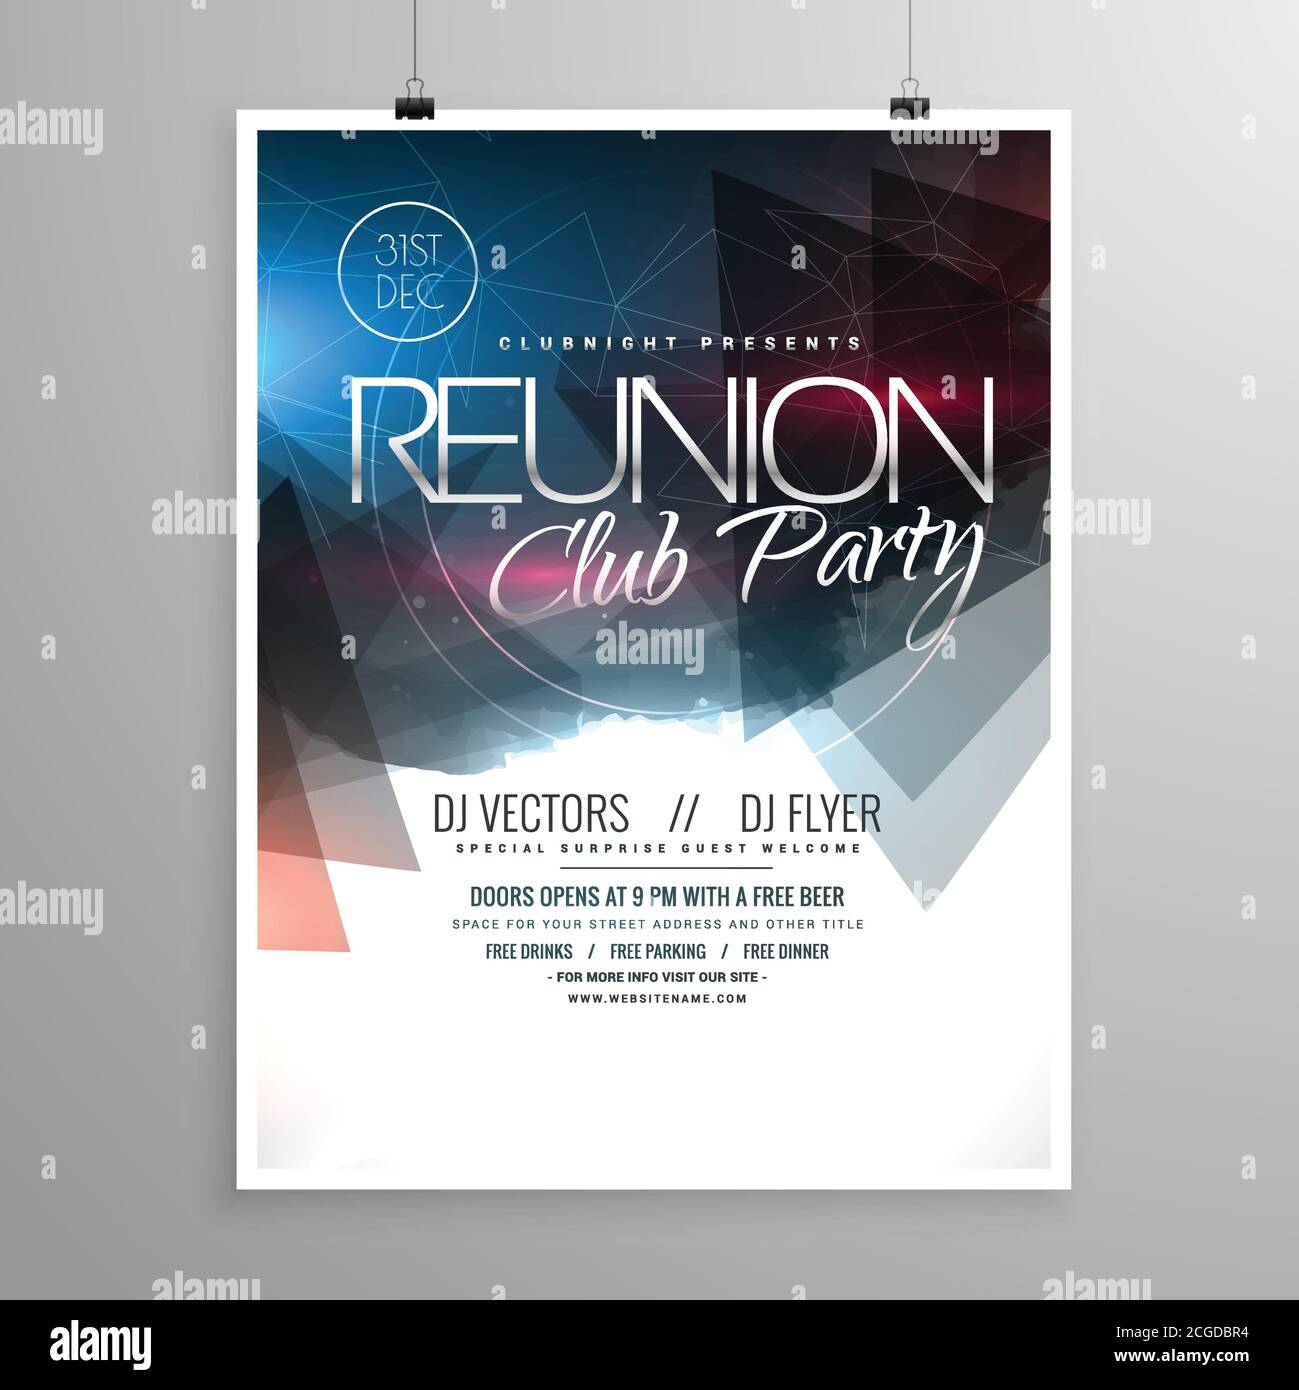 Event Club Party Flyer Template Brochure Design Stock Vector Image Art Alamy